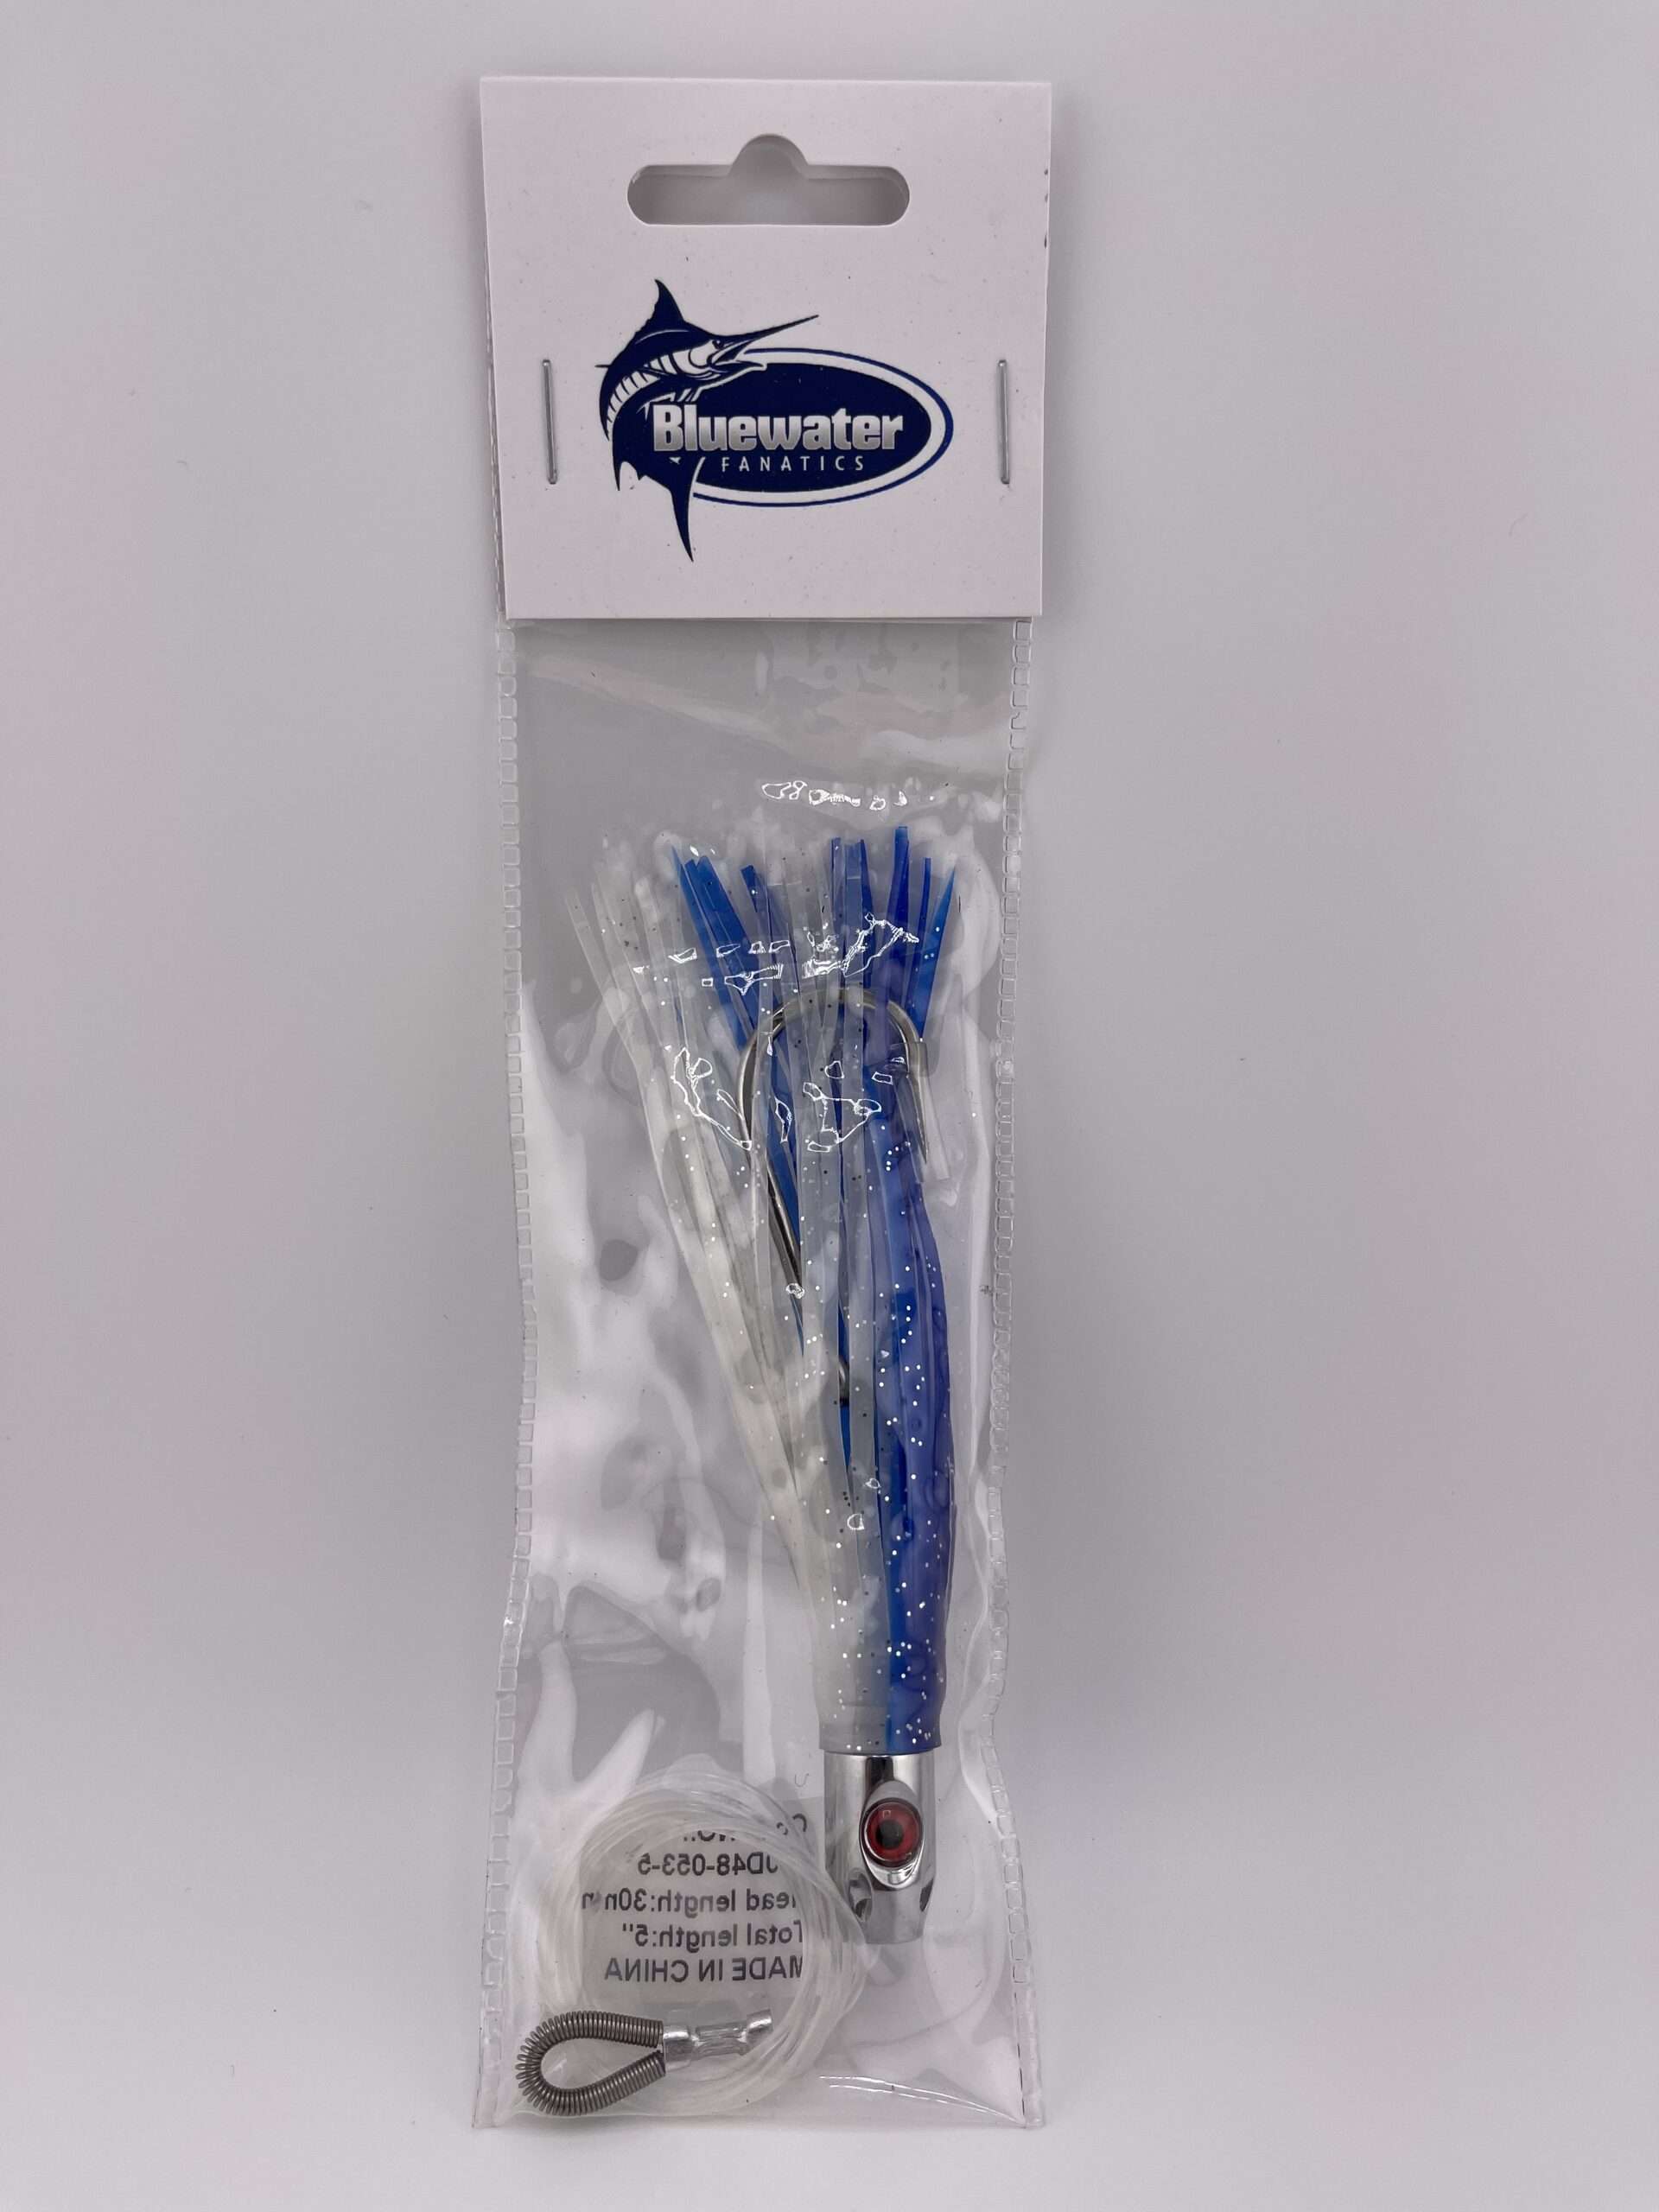 5 Blue and White Small Jet Head Saltwater Fishing Lure. Good for Mahi,  Tuna, Wahoo and all Billfish. 200D48-053-5 - Bluewater Fanatics